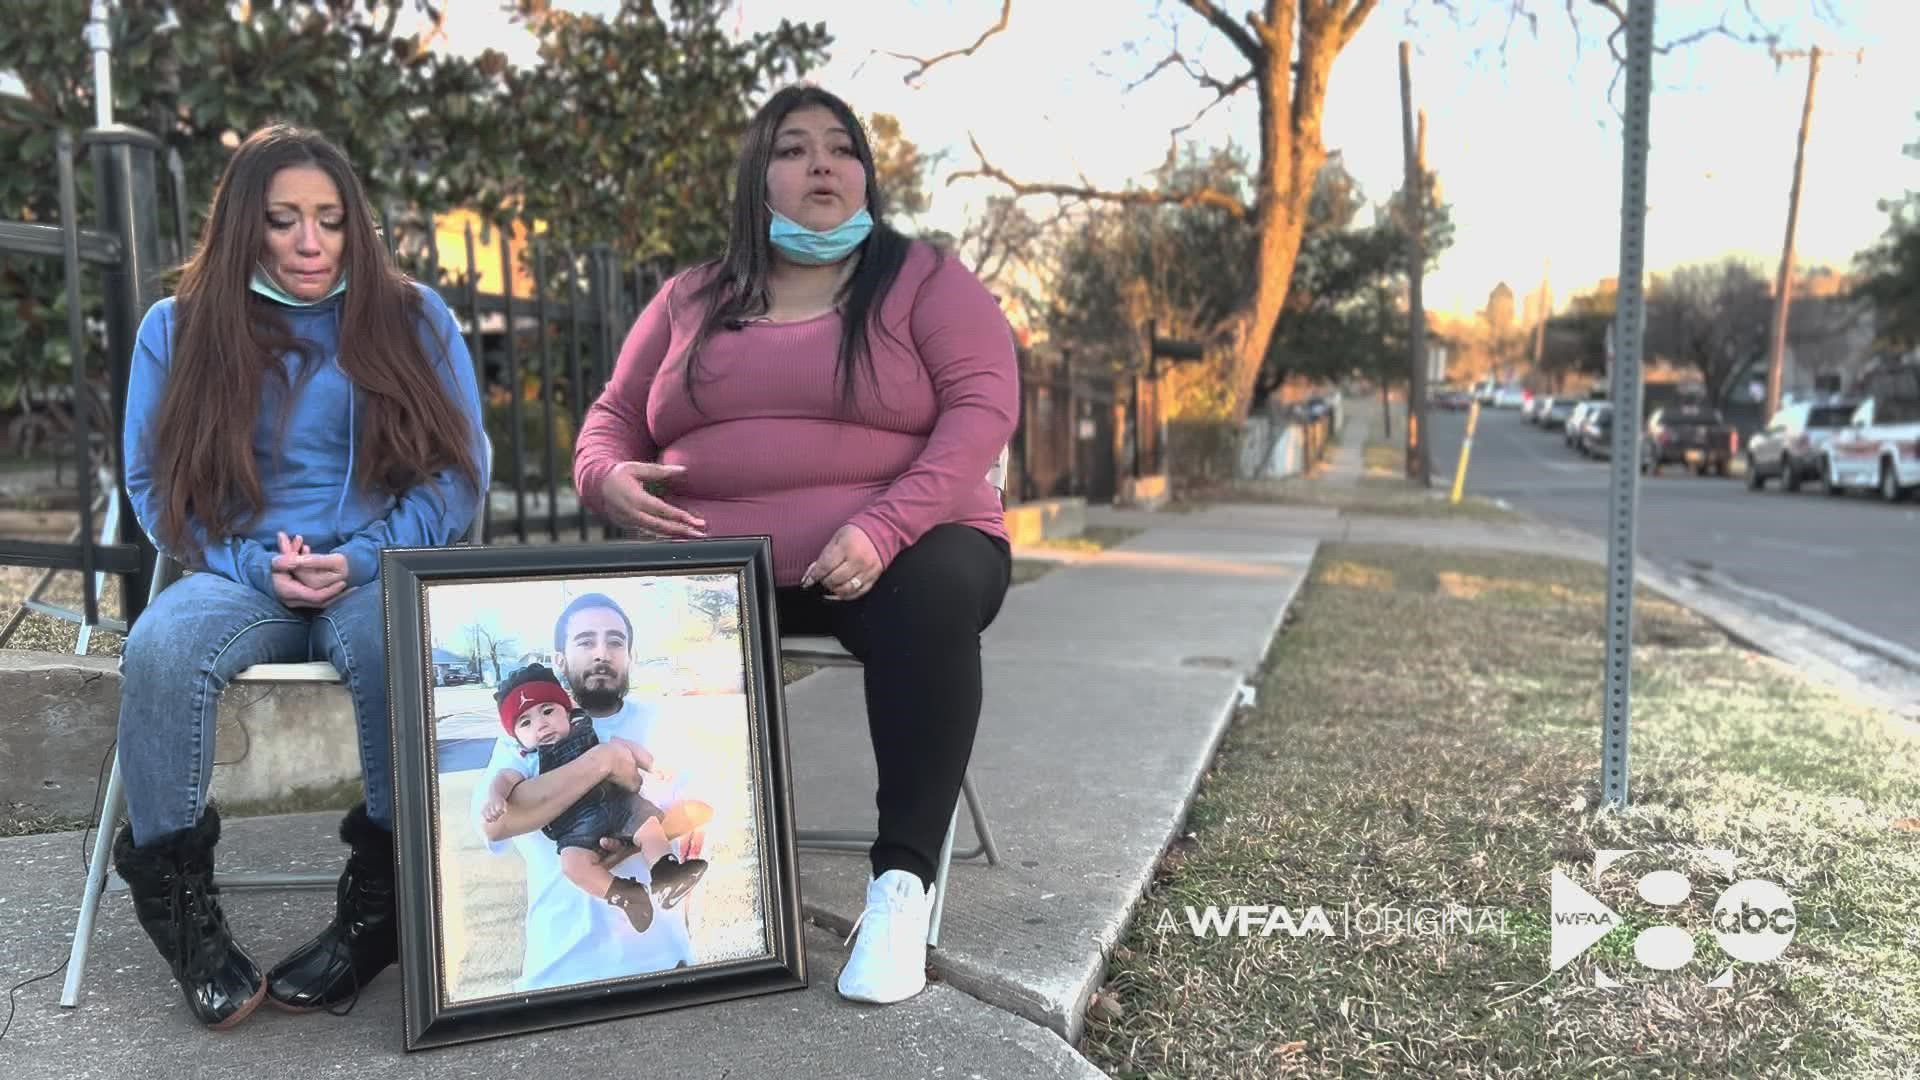 Across Texas, at least 246 people died as a result of Feb. 2021's deep freeze. A year later, WFAA met with three families still reeling over the loved ones they lost